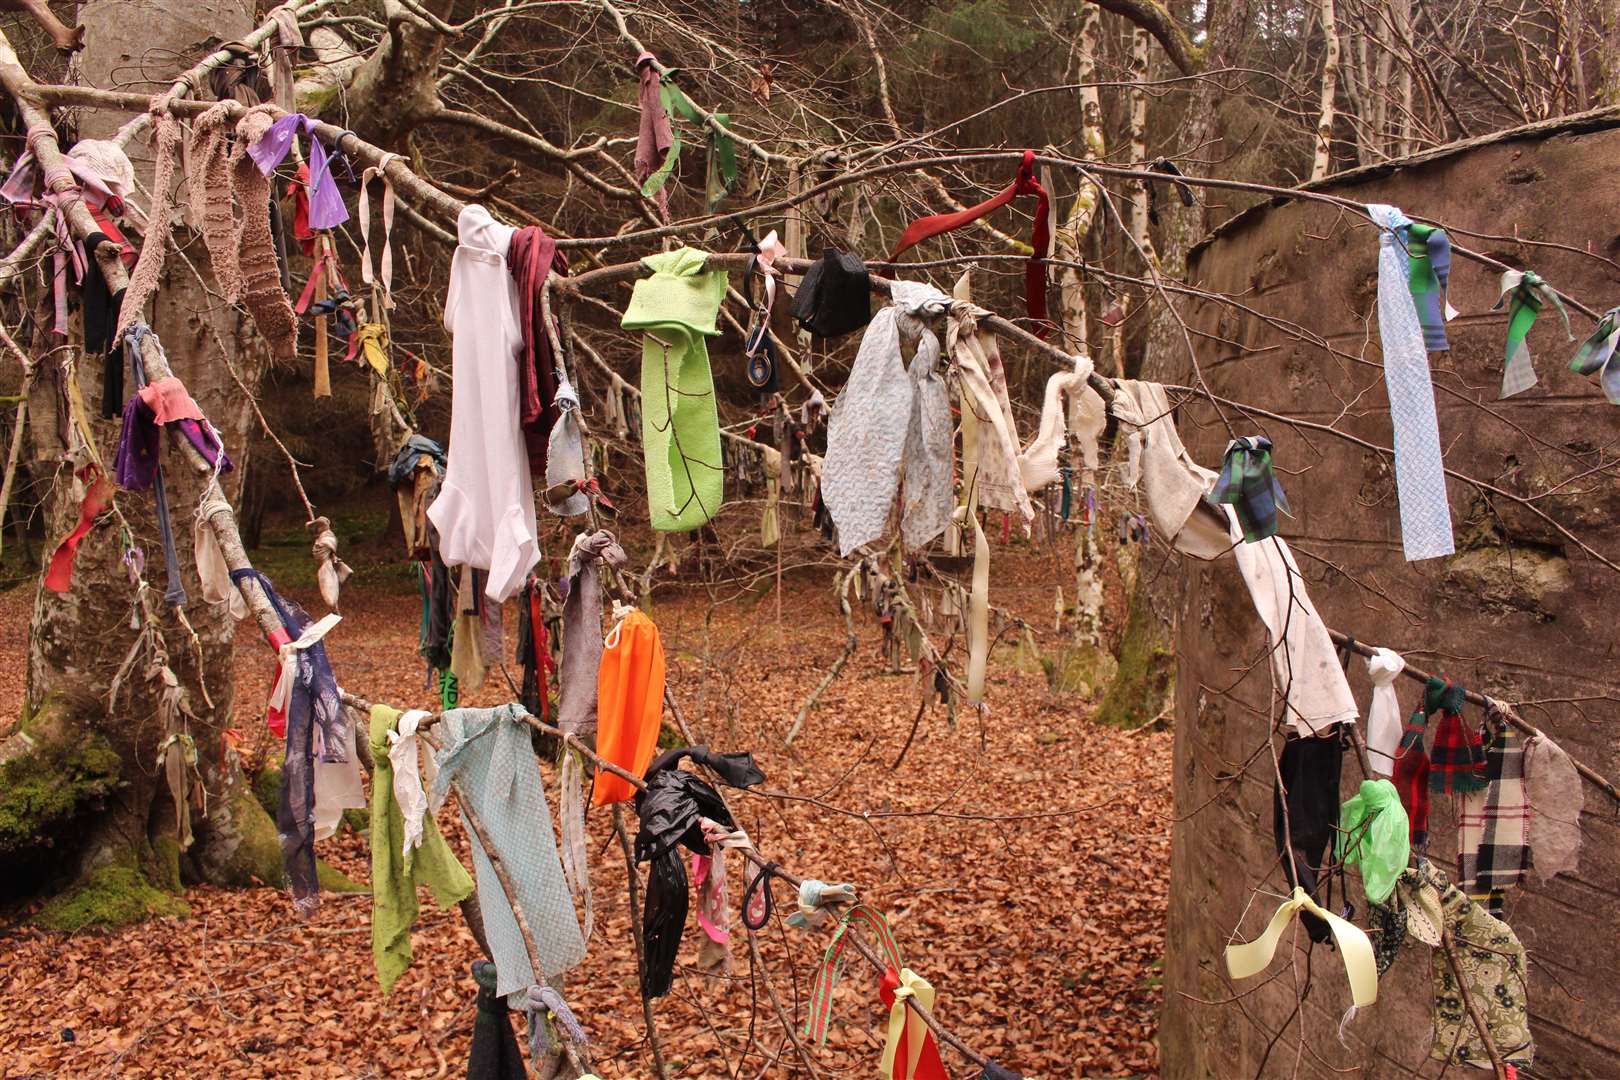 Colourful rags adorning the tree branches close to the clootie well are said to bring good luck.